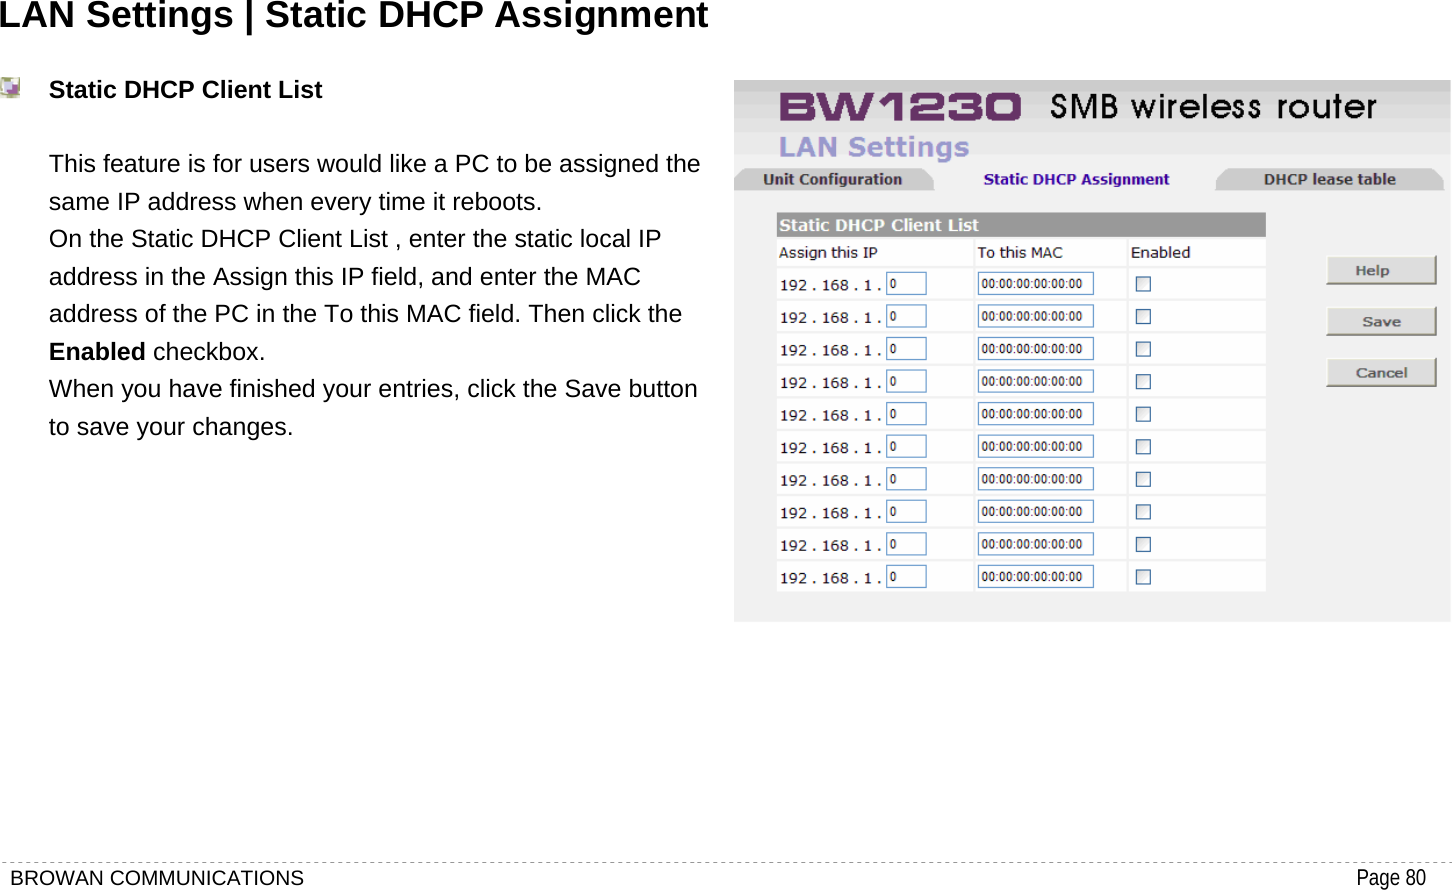 BROWAN COMMUNICATIONS                                                                                           Page 80  LAN Settings | Static DHCP Assignment  Static DHCP Client List  This feature is for users would like a PC to be assigned the same IP address when every time it reboots. On the Static DHCP Client List , enter the static local IP address in the Assign this IP field, and enter the MAC address of the PC in the To this MAC field. Then click the Enabled checkbox.   When you have finished your entries, click the Save button to save your changes.         